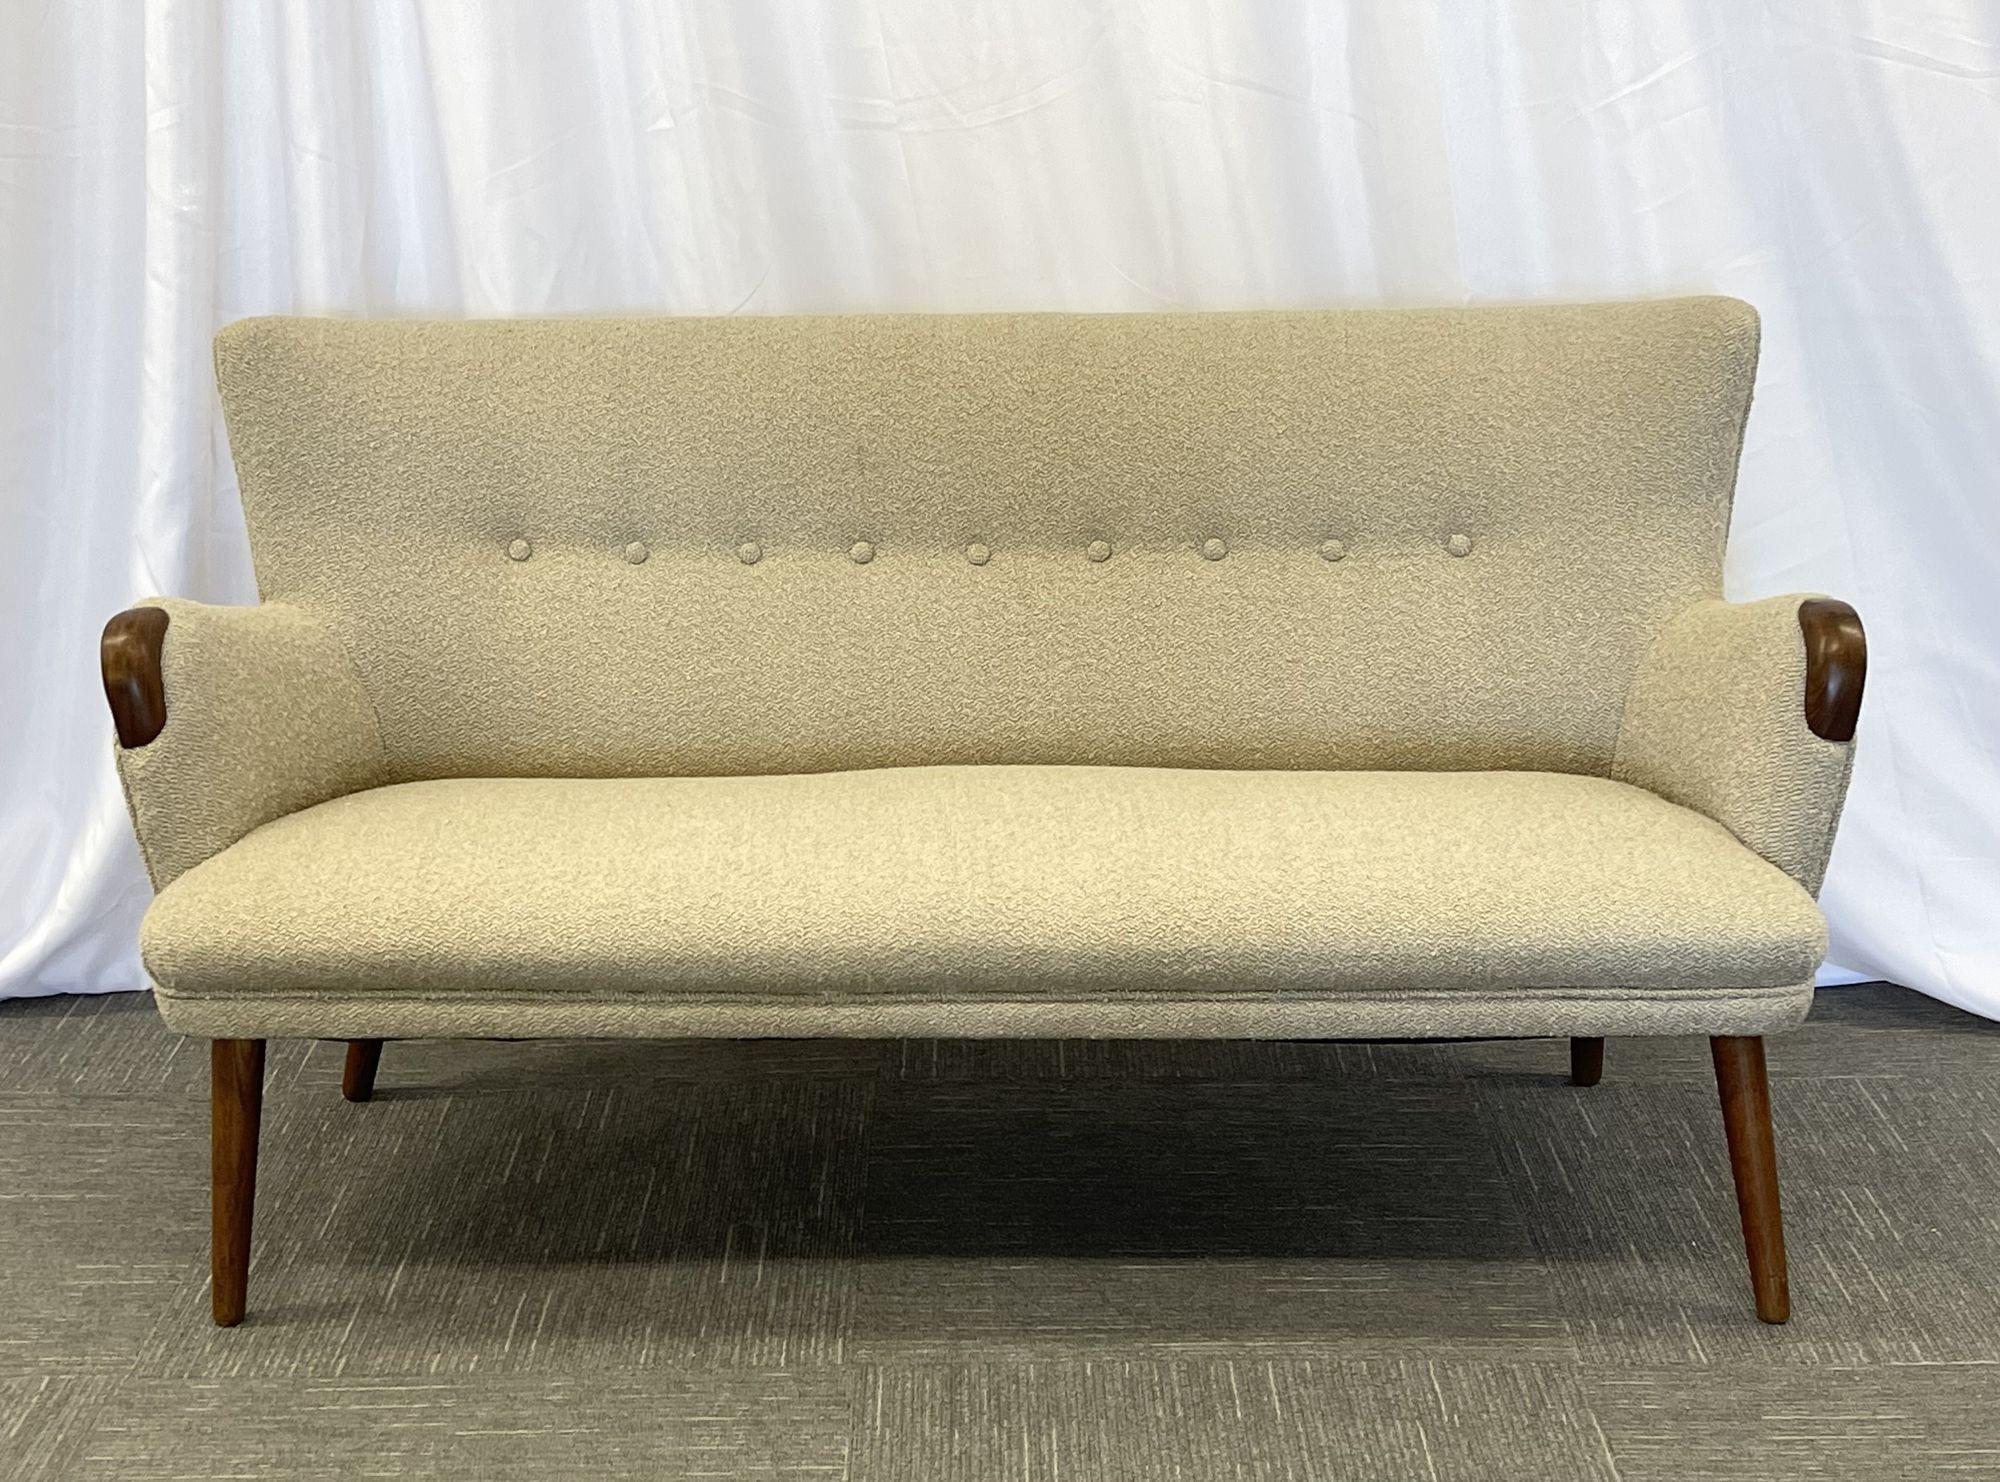 Mid-Century Modern Danish cabinetmaker sofa / settee, boucle, Goerg Thams Style
 
Chic mid-century modern designer sofa designed and manufactured in Sweden. This organic form sofa is newly re-upholstered in a gorgeous tan boucle upper. In the